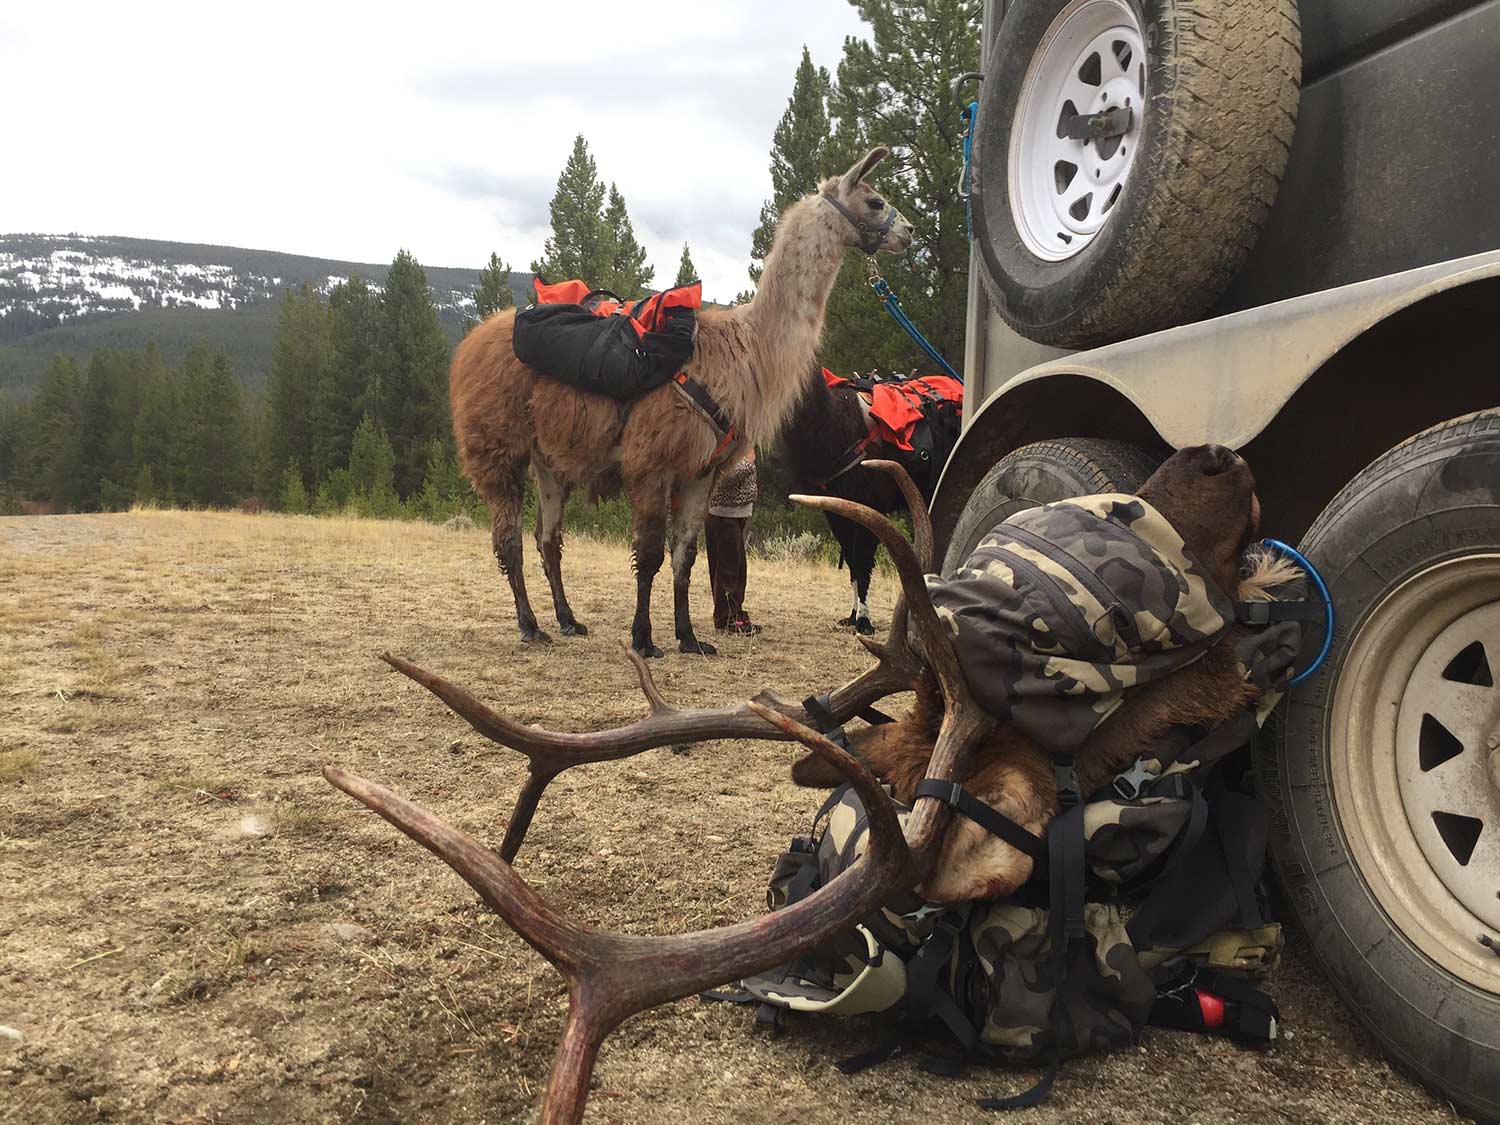 Find Elk From Your Kitchen Table With This 6-Step Digital Scouting Plan